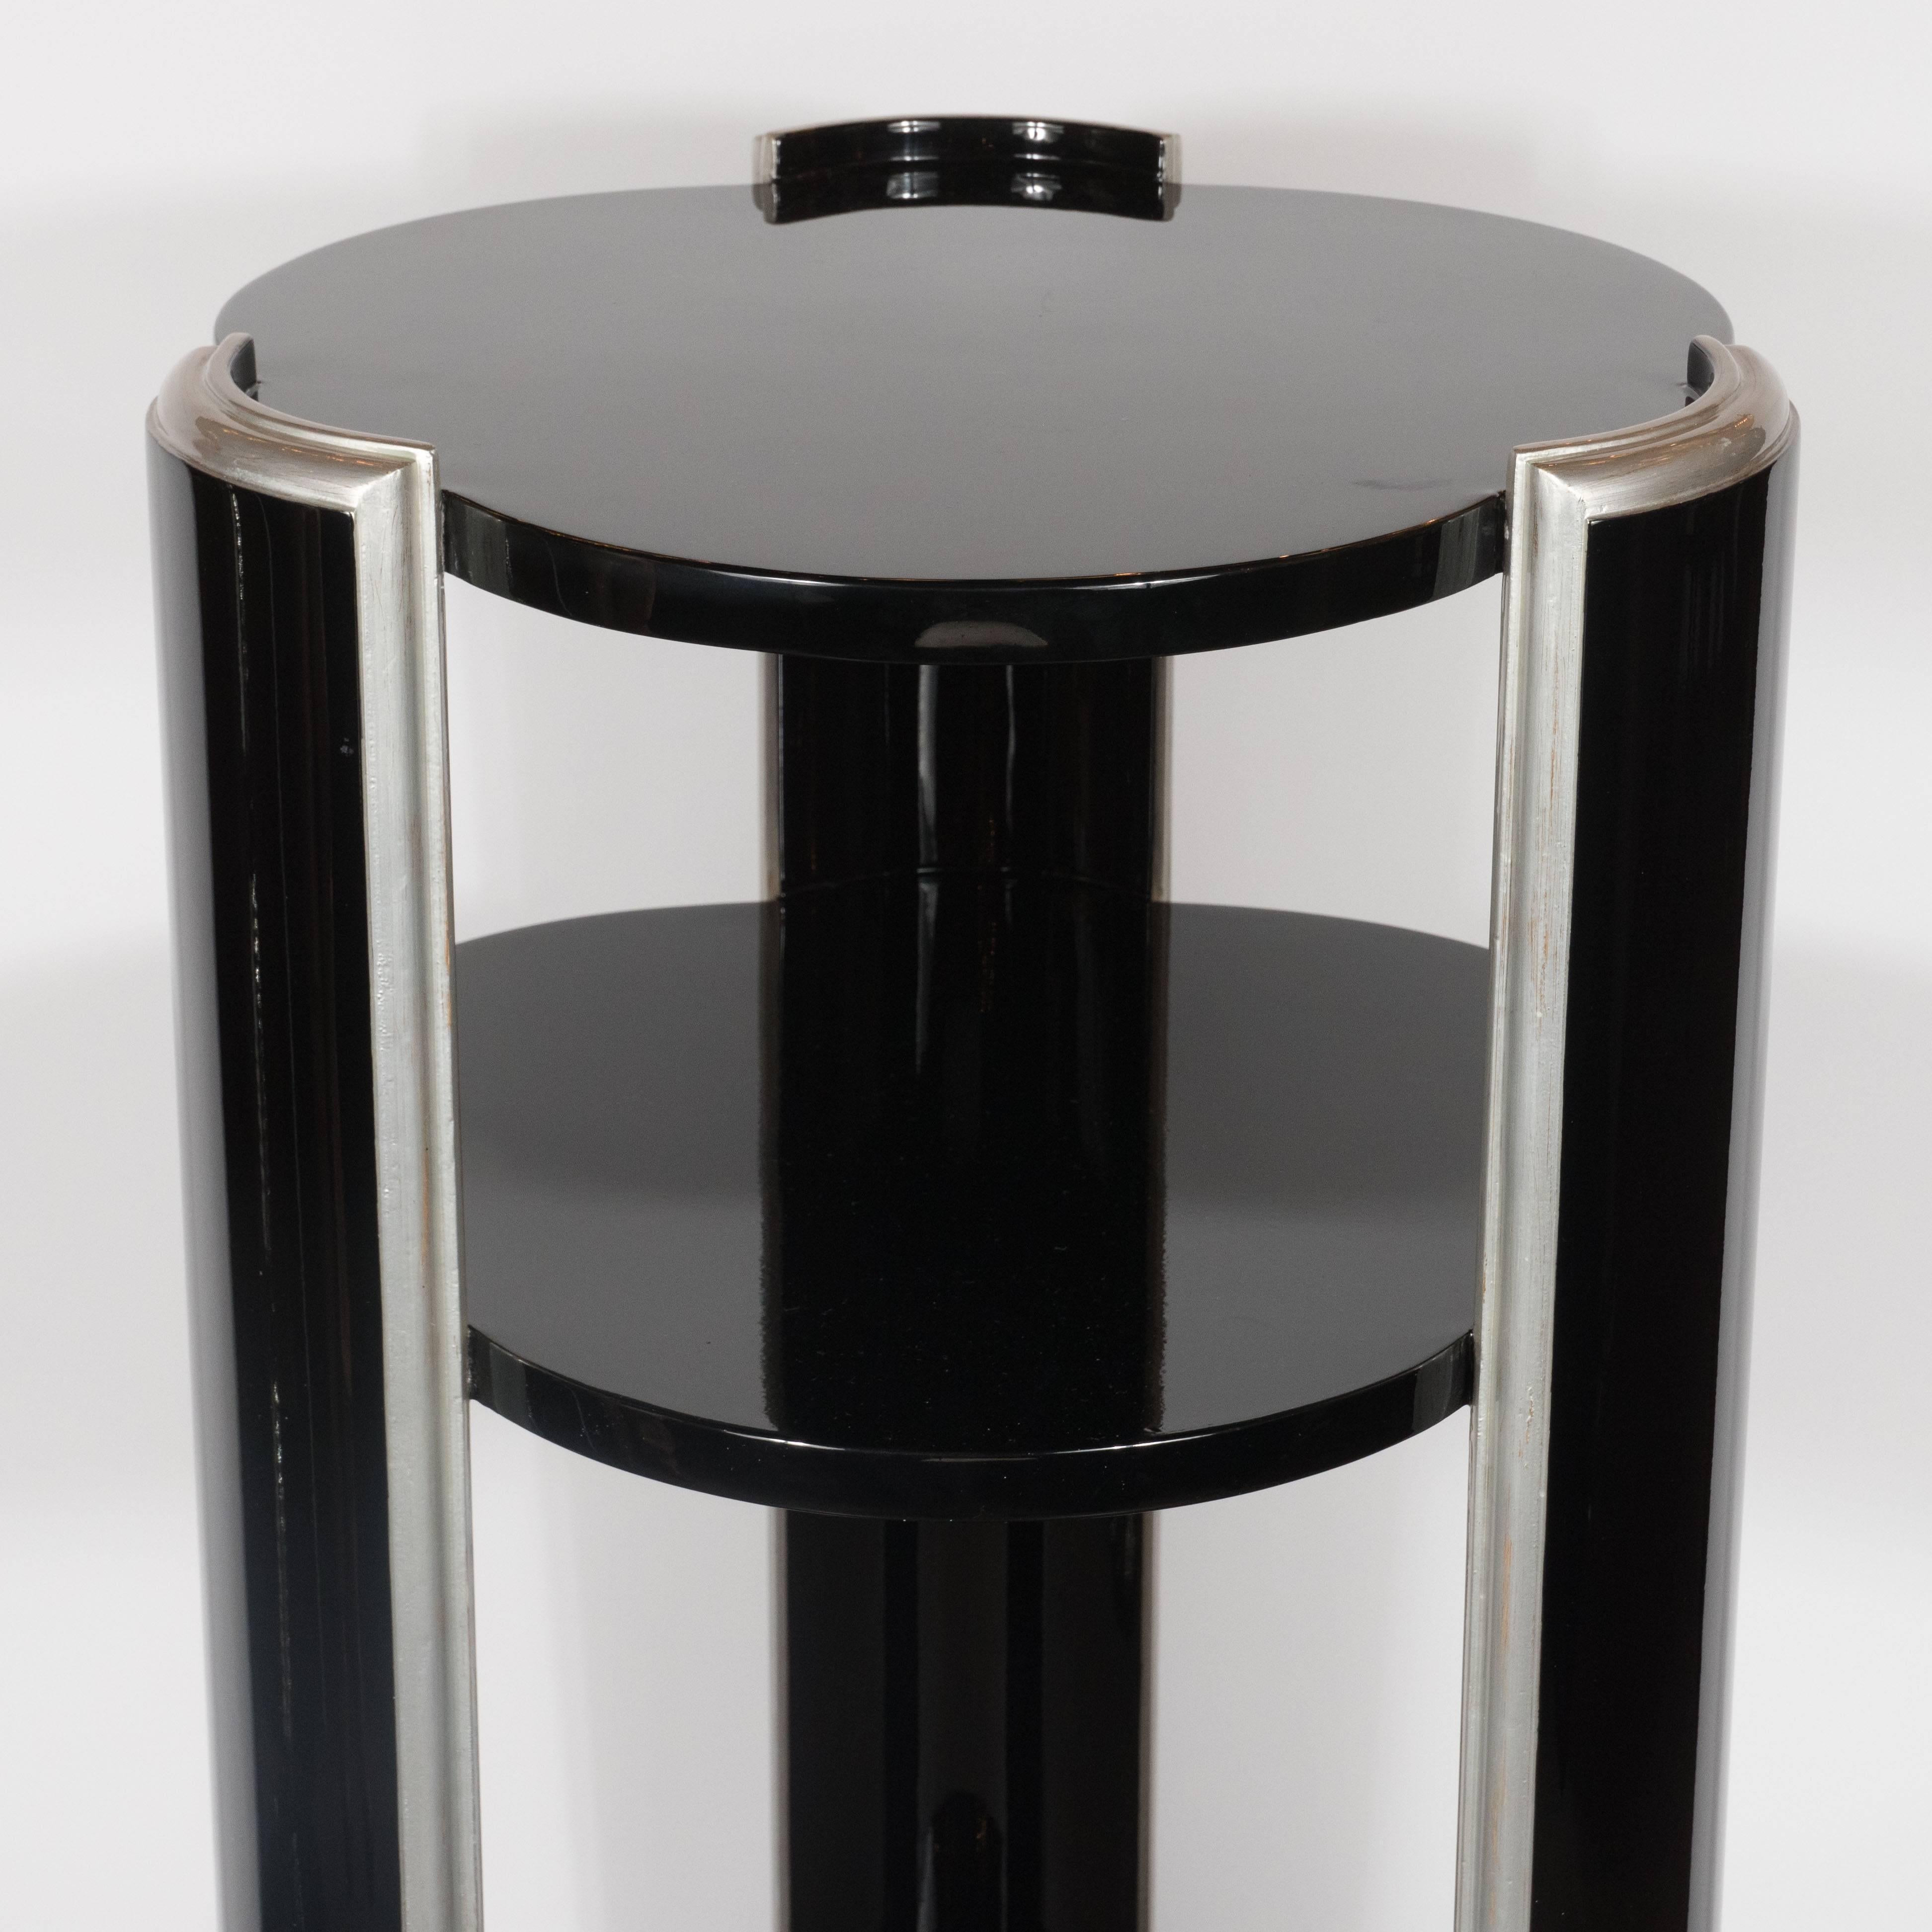 Mid-20th Century Elegant American Art Deco Three-Tiered Pedestal in Black Lacquer and Silver Leaf